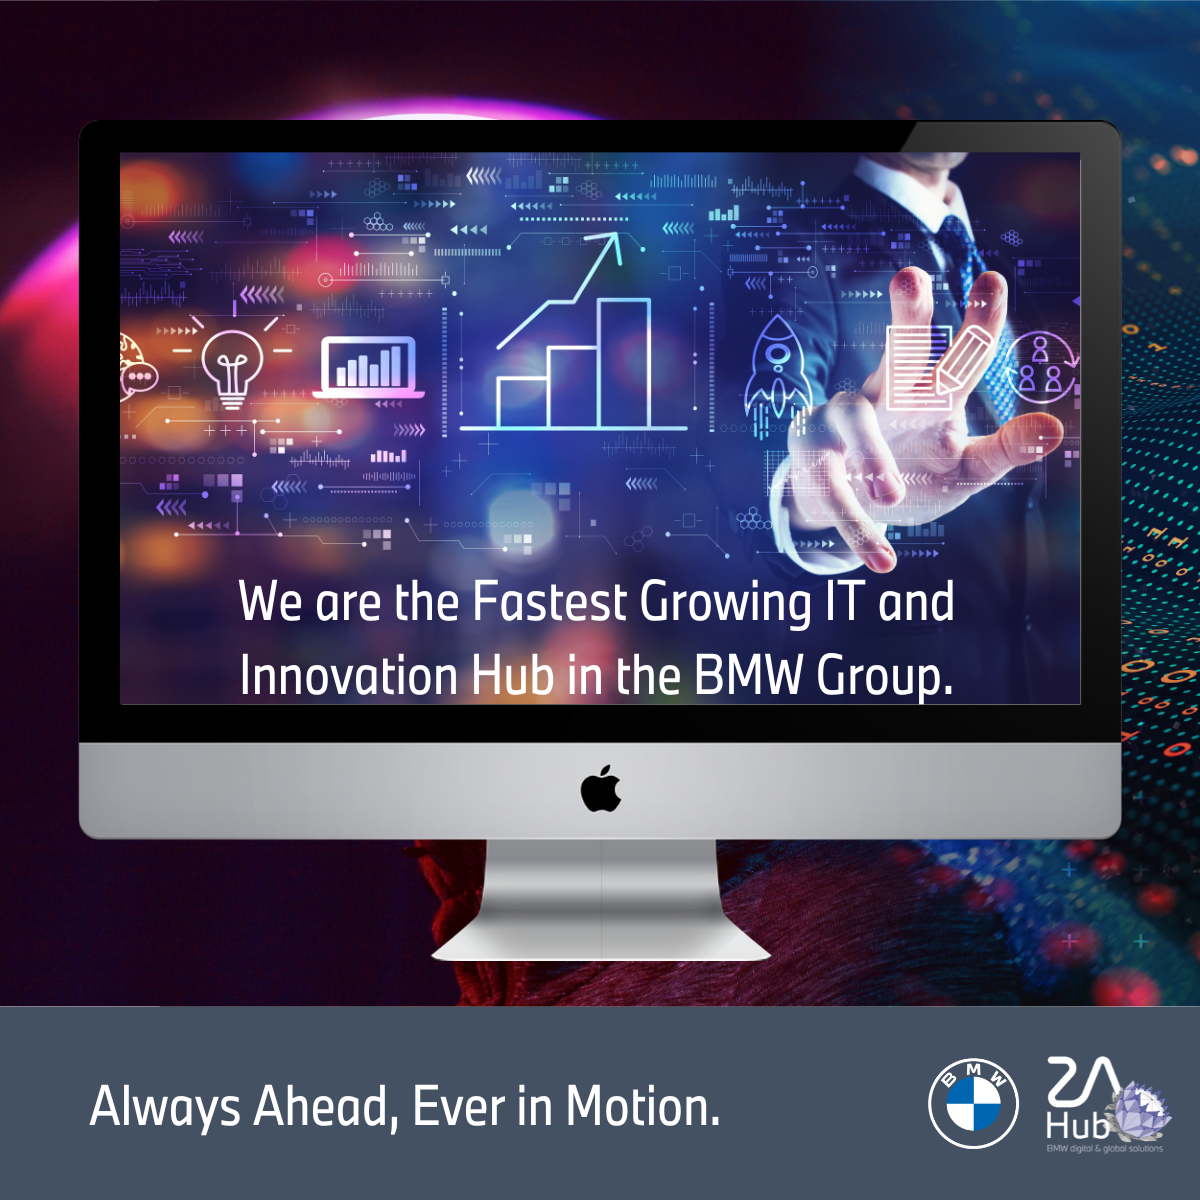 We are the fastest growing IT and Innovation Hub in the BMW Group.